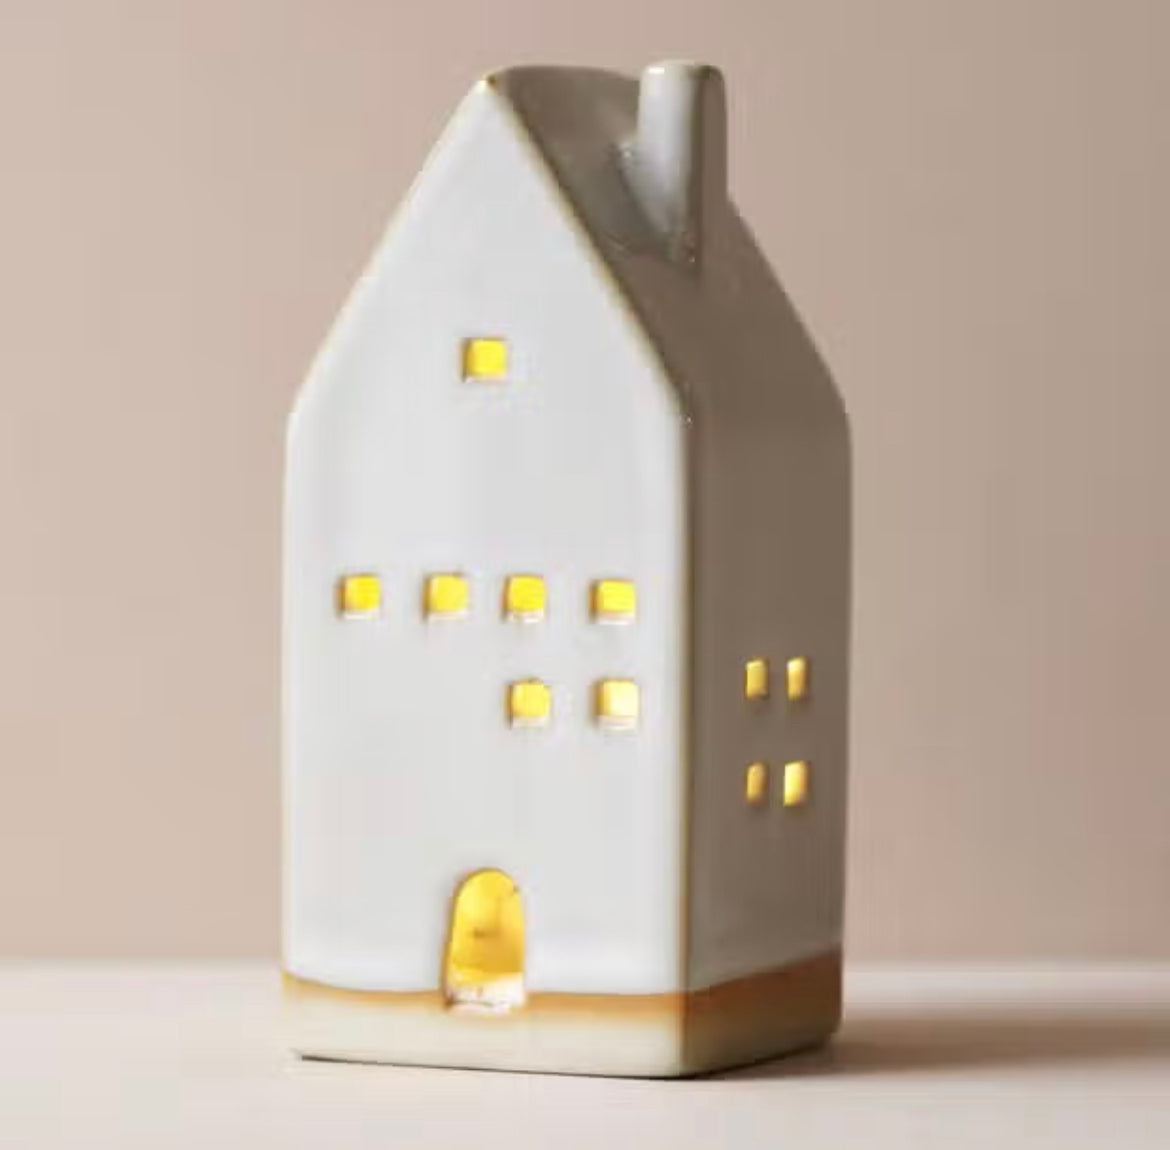 Ceramic house led decoration - The Bristol Artisan Handmade Sustainable Gifts and Homewares.